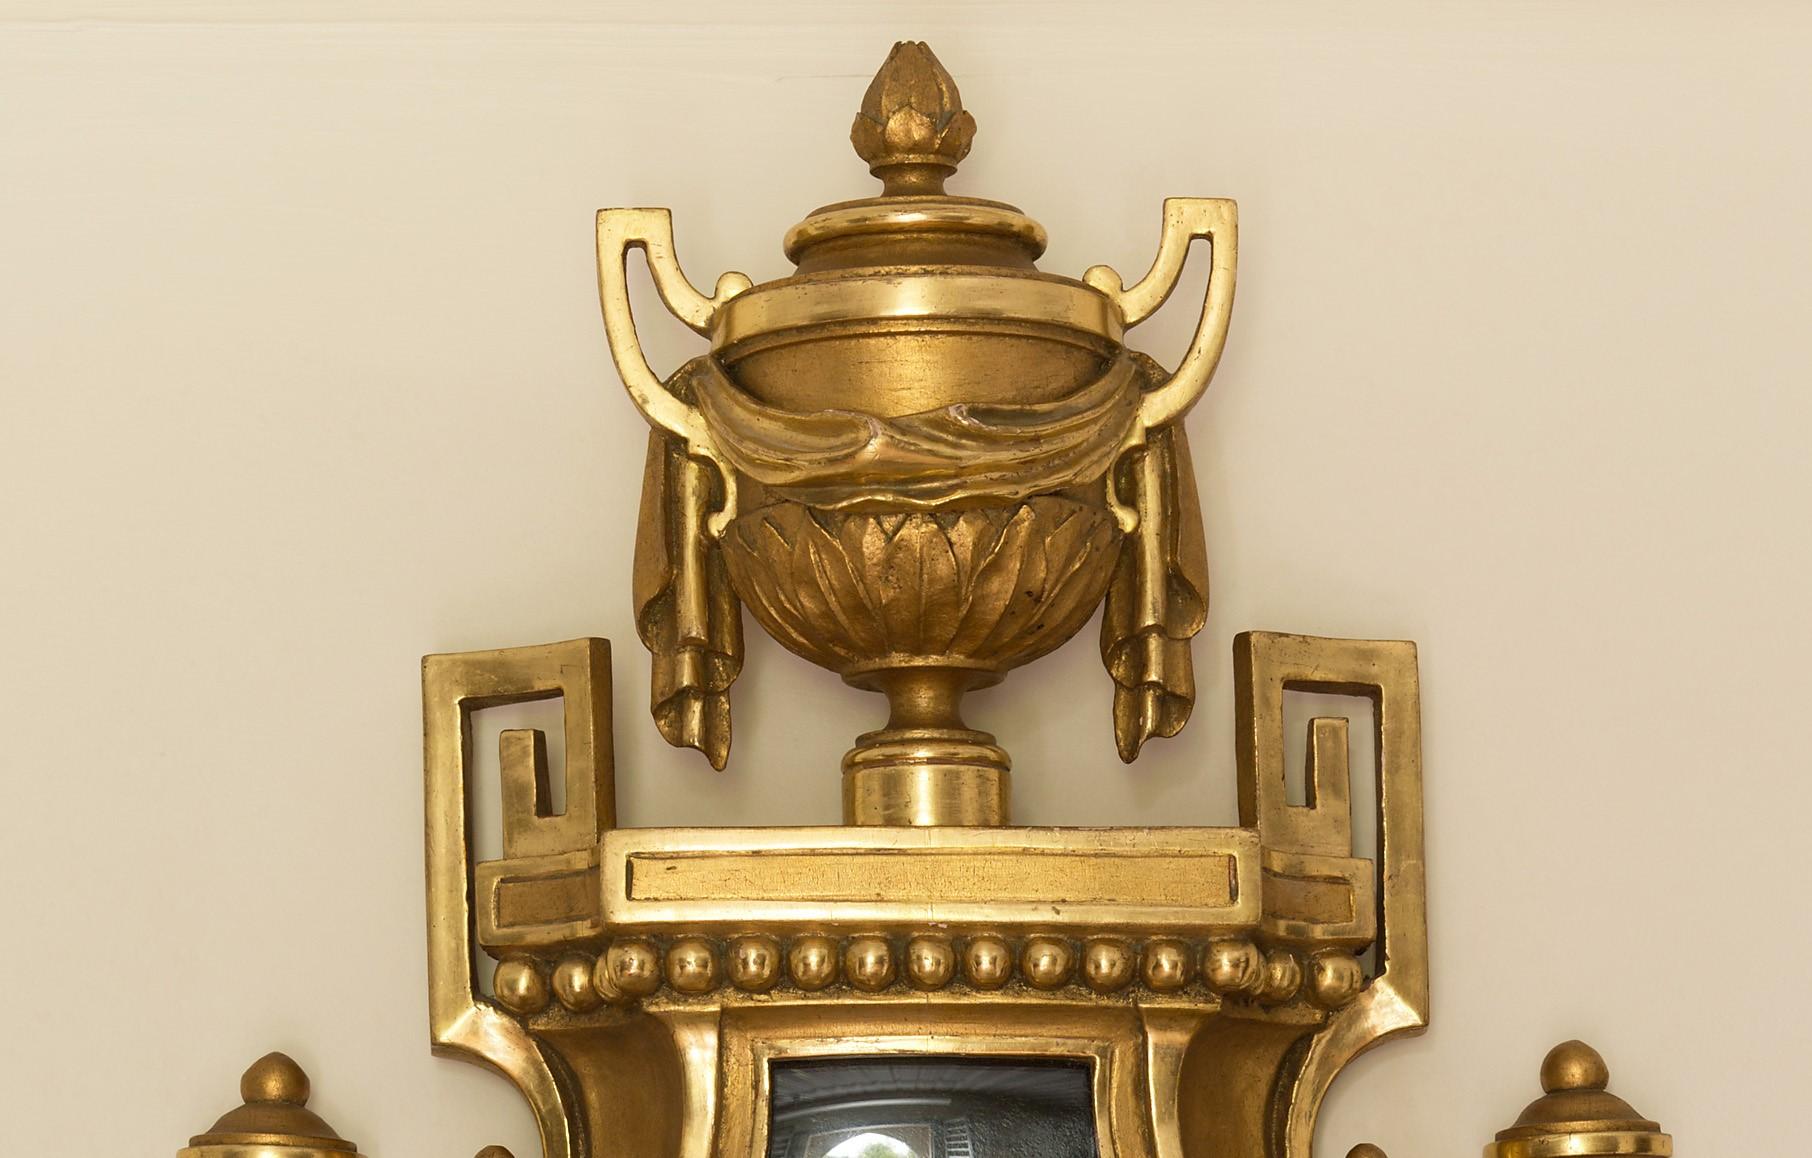 Gilt French cartel clock

Enamel dial with Roman numerals signed Defaud, Paris.

Giltwood case with swag decoration and visible pendulum.

Eight day movement striking the hours and halves on a silvered bell. The backplate stamped C.H.Paris